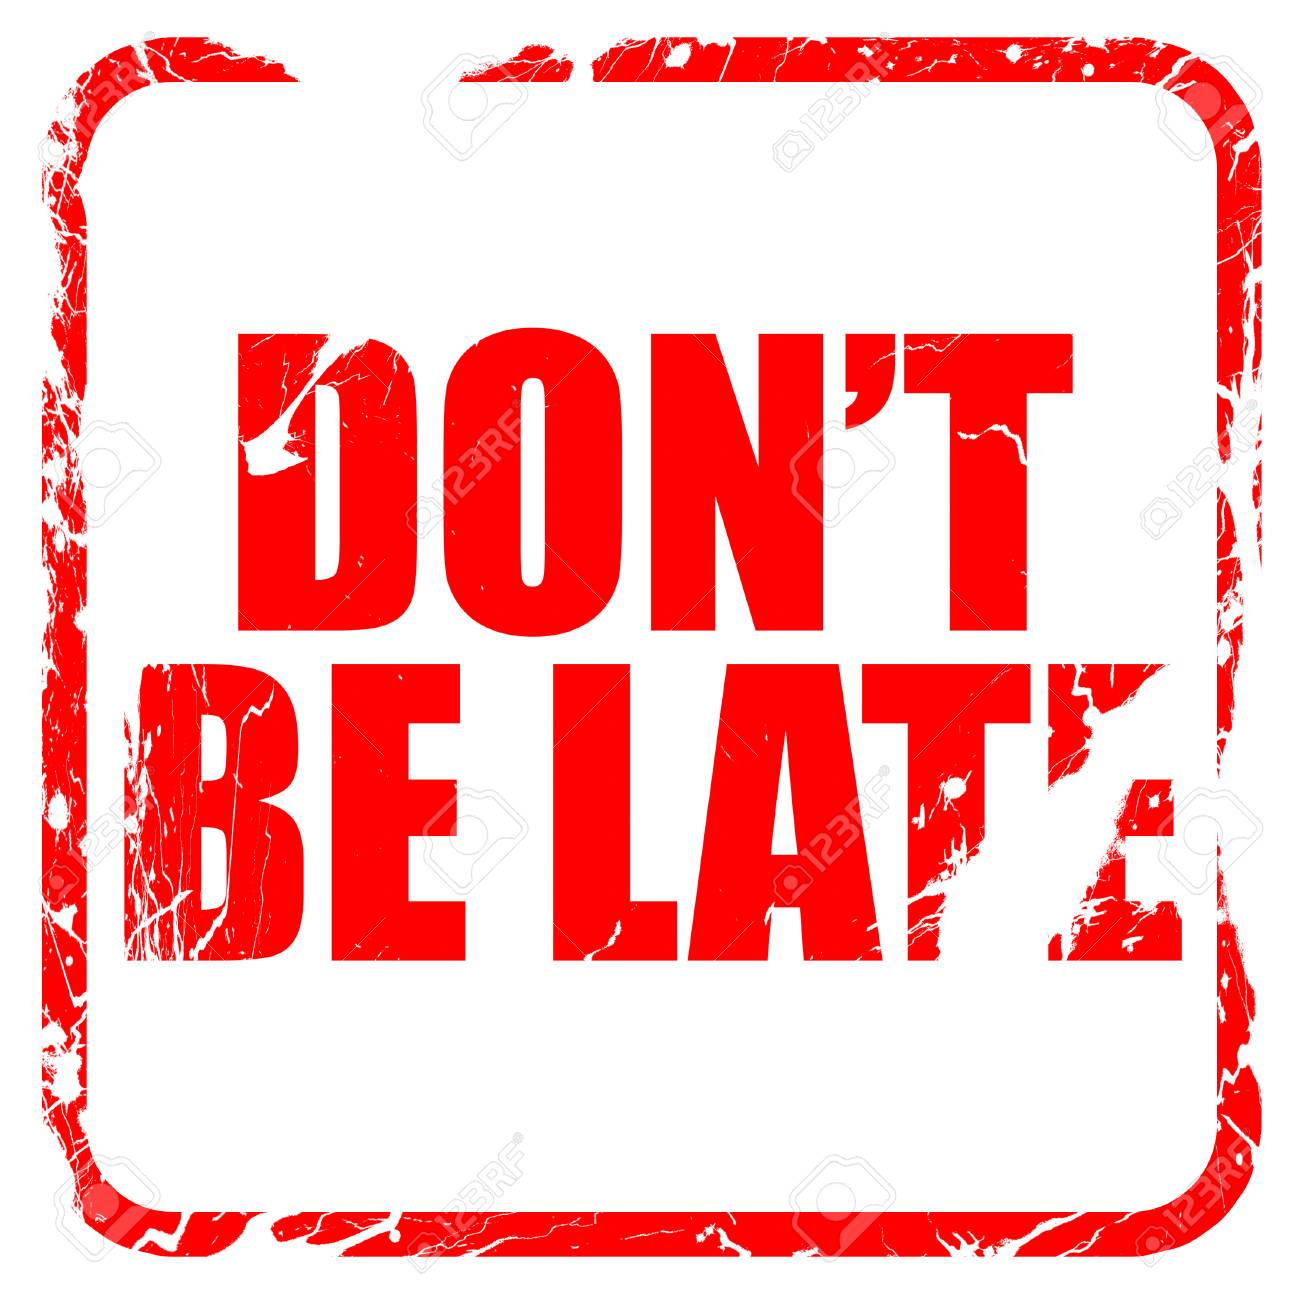 don't be late, red rubber stamp with grunge edges.